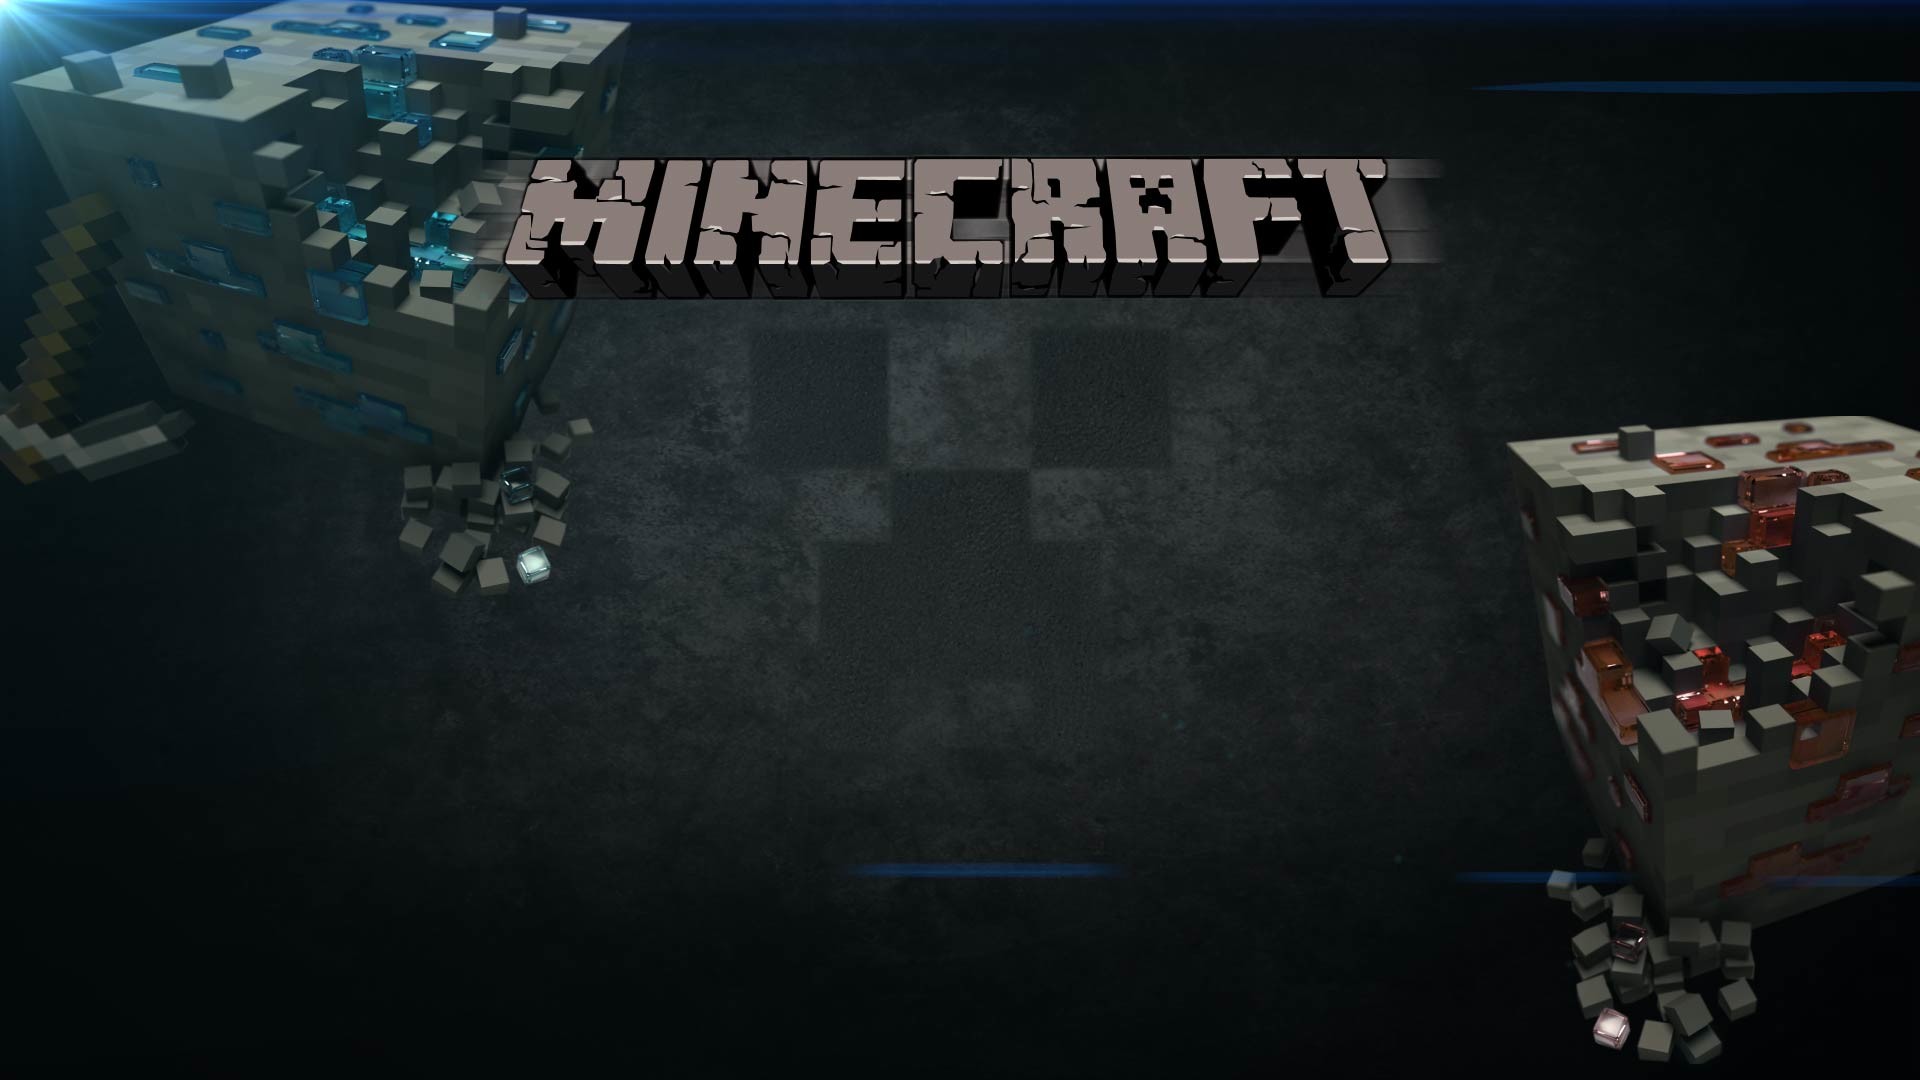 Minecraft Background Images Hd Wallpaper 1920x1080